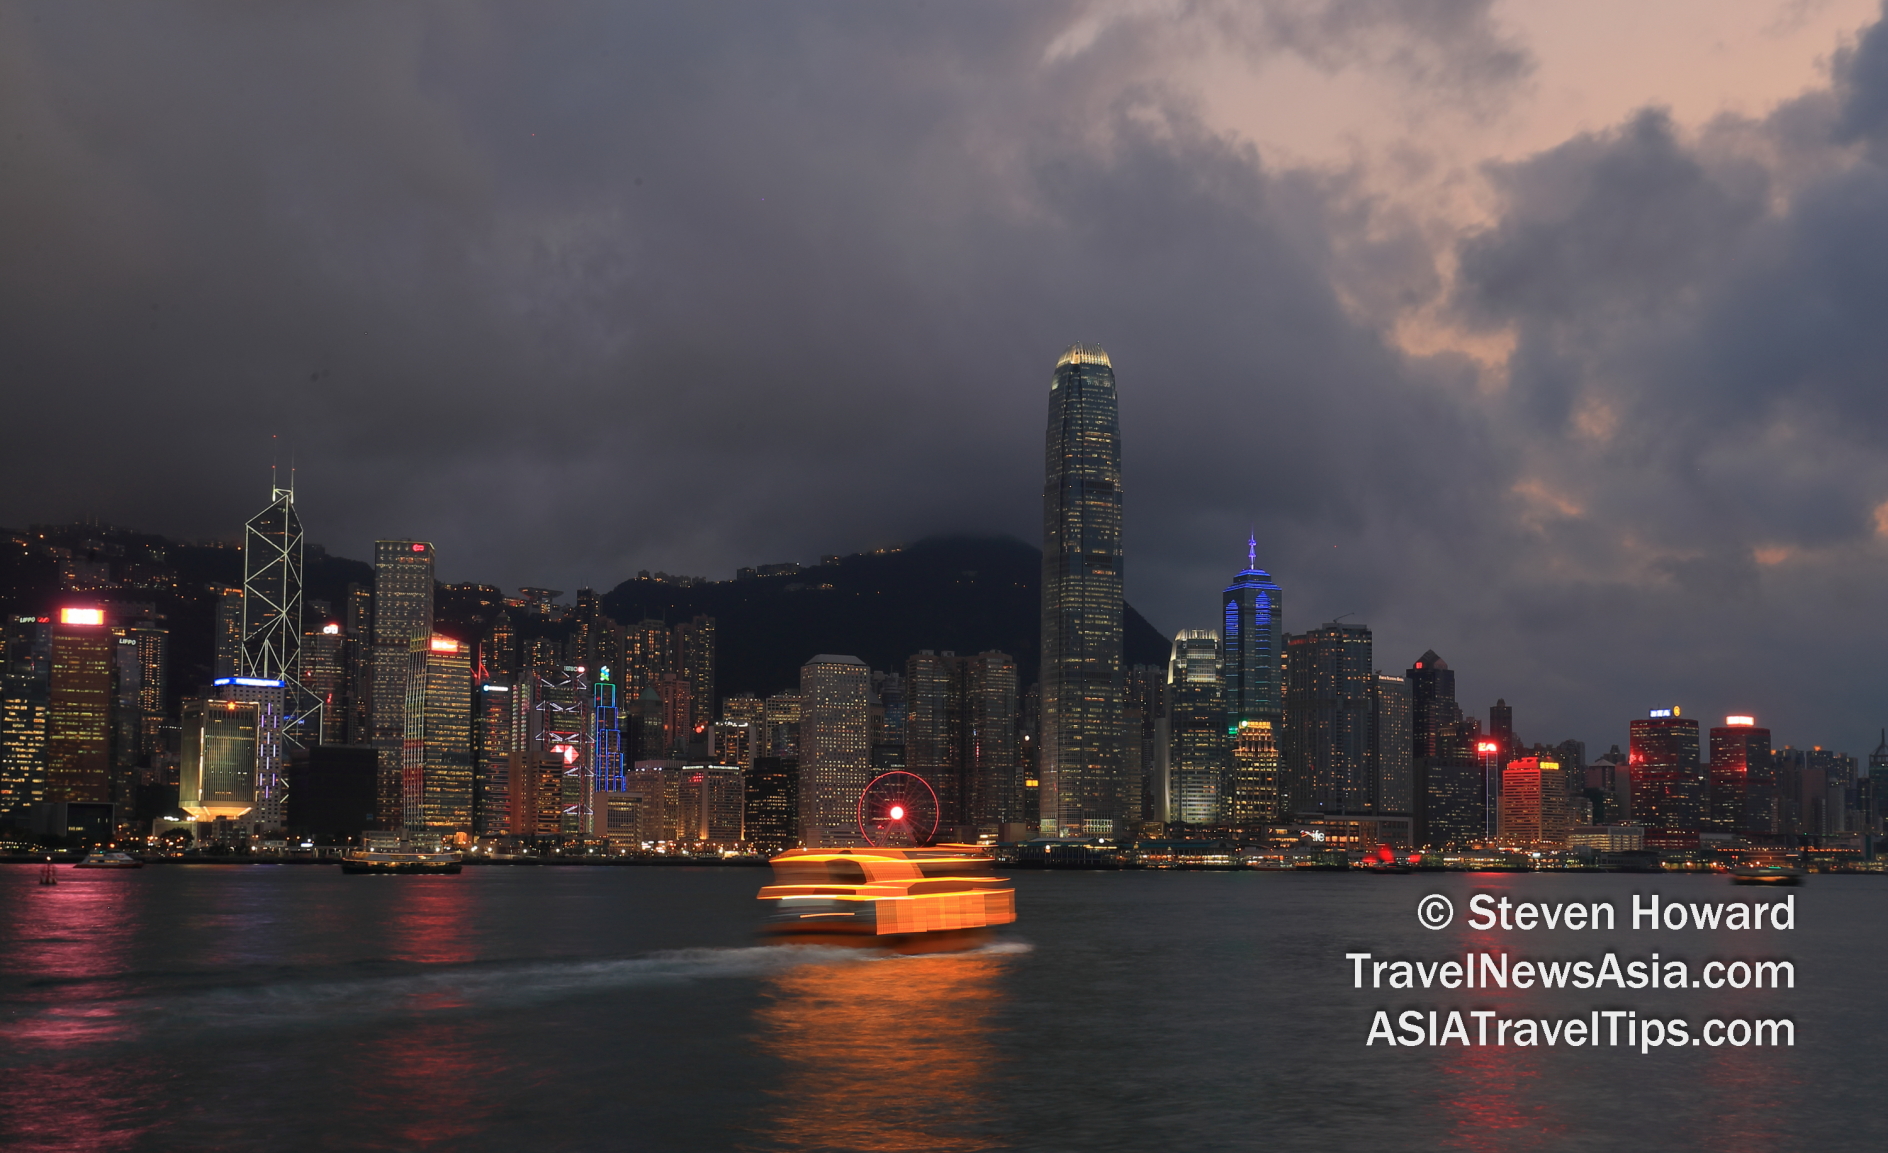 Hong Kong Island and Victoria Harbour. Picture by Steven Howard of TravelNewsAsia.com Click to enlarge.